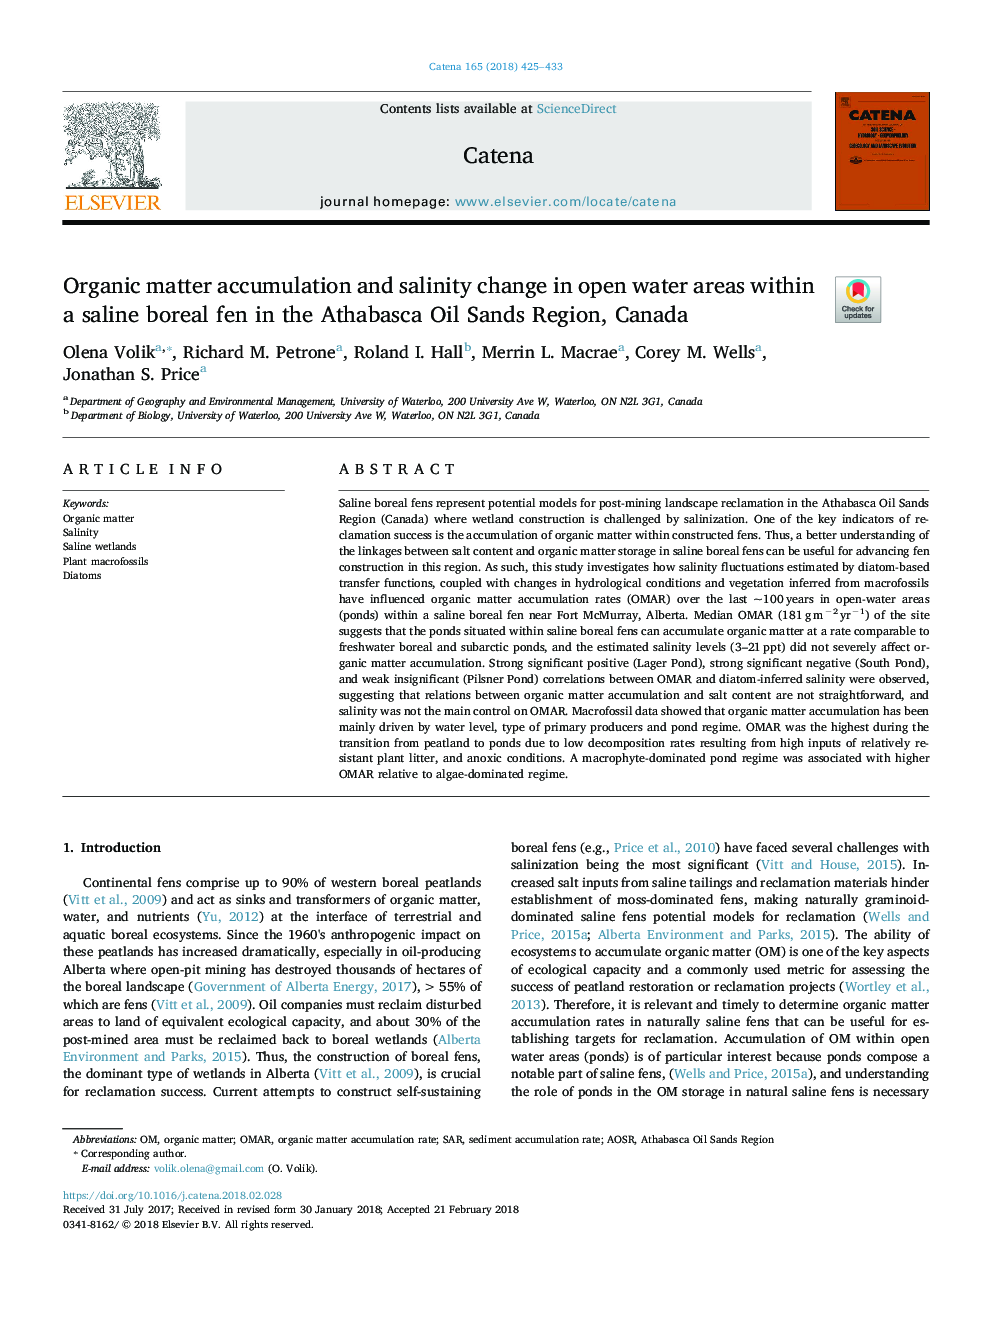 Organic matter accumulation and salinity change in open water areas within a saline boreal fen in the Athabasca Oil Sands Region, Canada